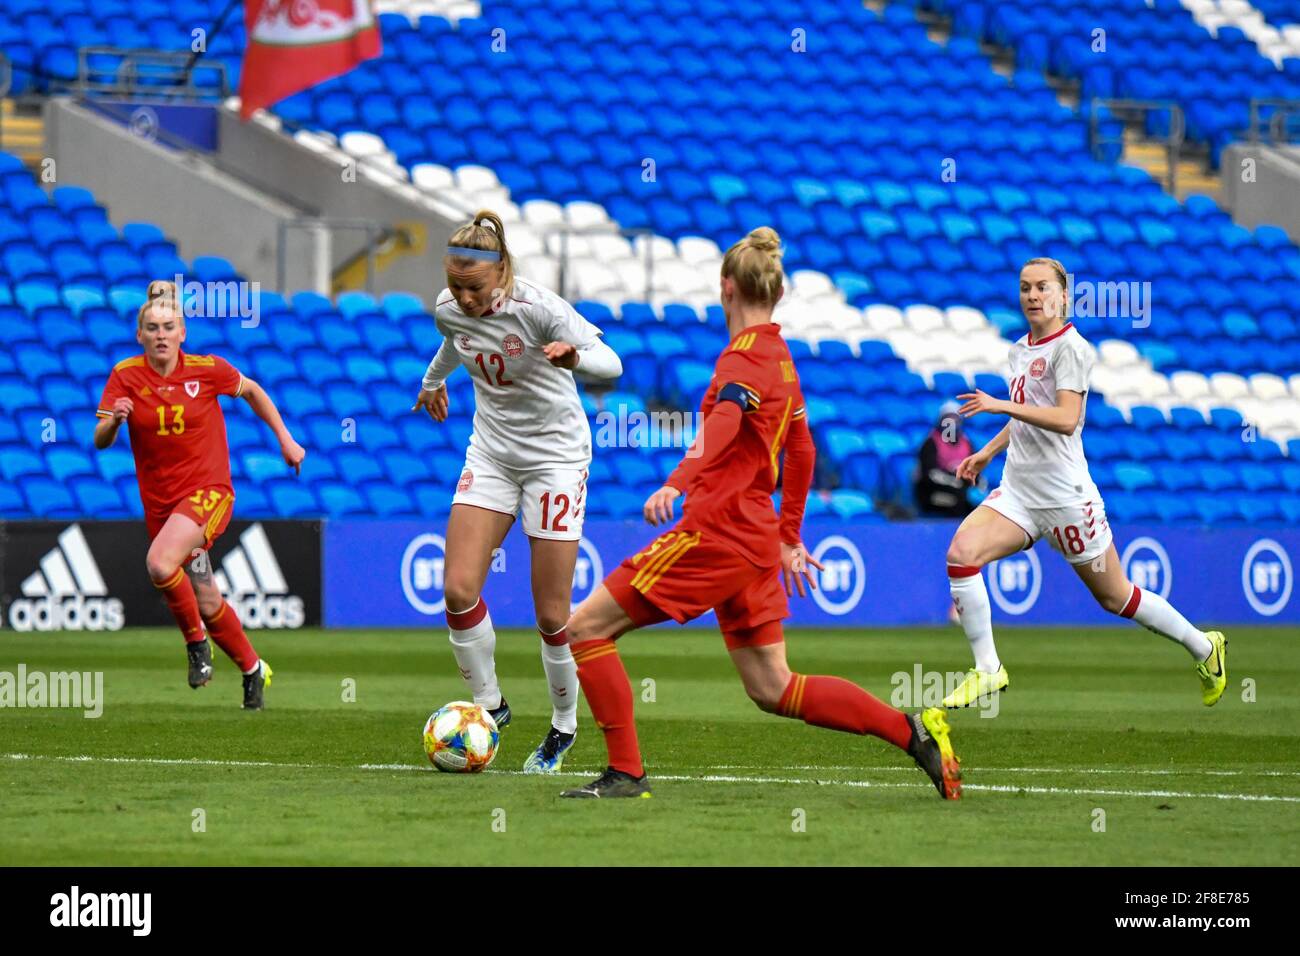 Cardiff, Wales. 13 April, 2021. Stine Larsen of Denmark Women under pressure from Sophie Ingle of Wales Women during the Women's International Friendly match between Wales and Denmark at the Cardiff City Stadium in Cardiff, Wales, UK on 13, April 2021. Credit: Duncan Thomas/Majestic Media/Alamy Live News. Stock Photo